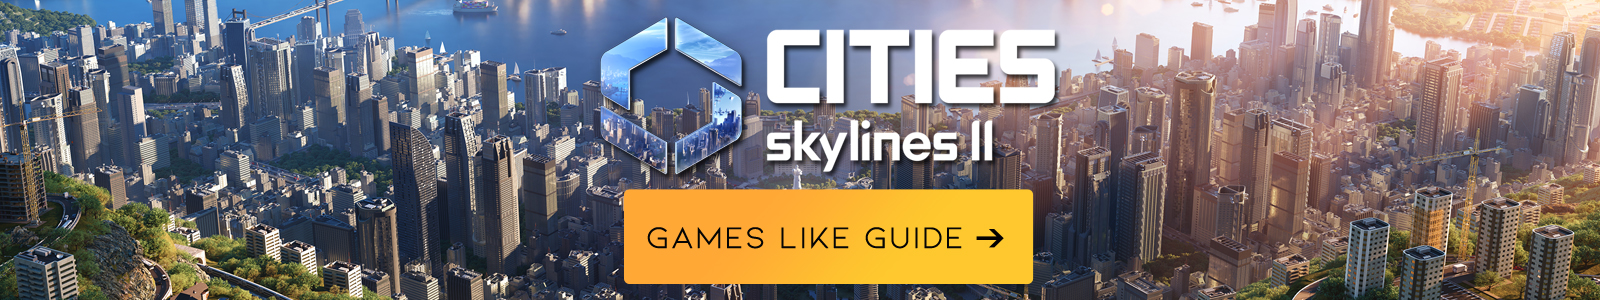 Cities Skylines 2 games like guide